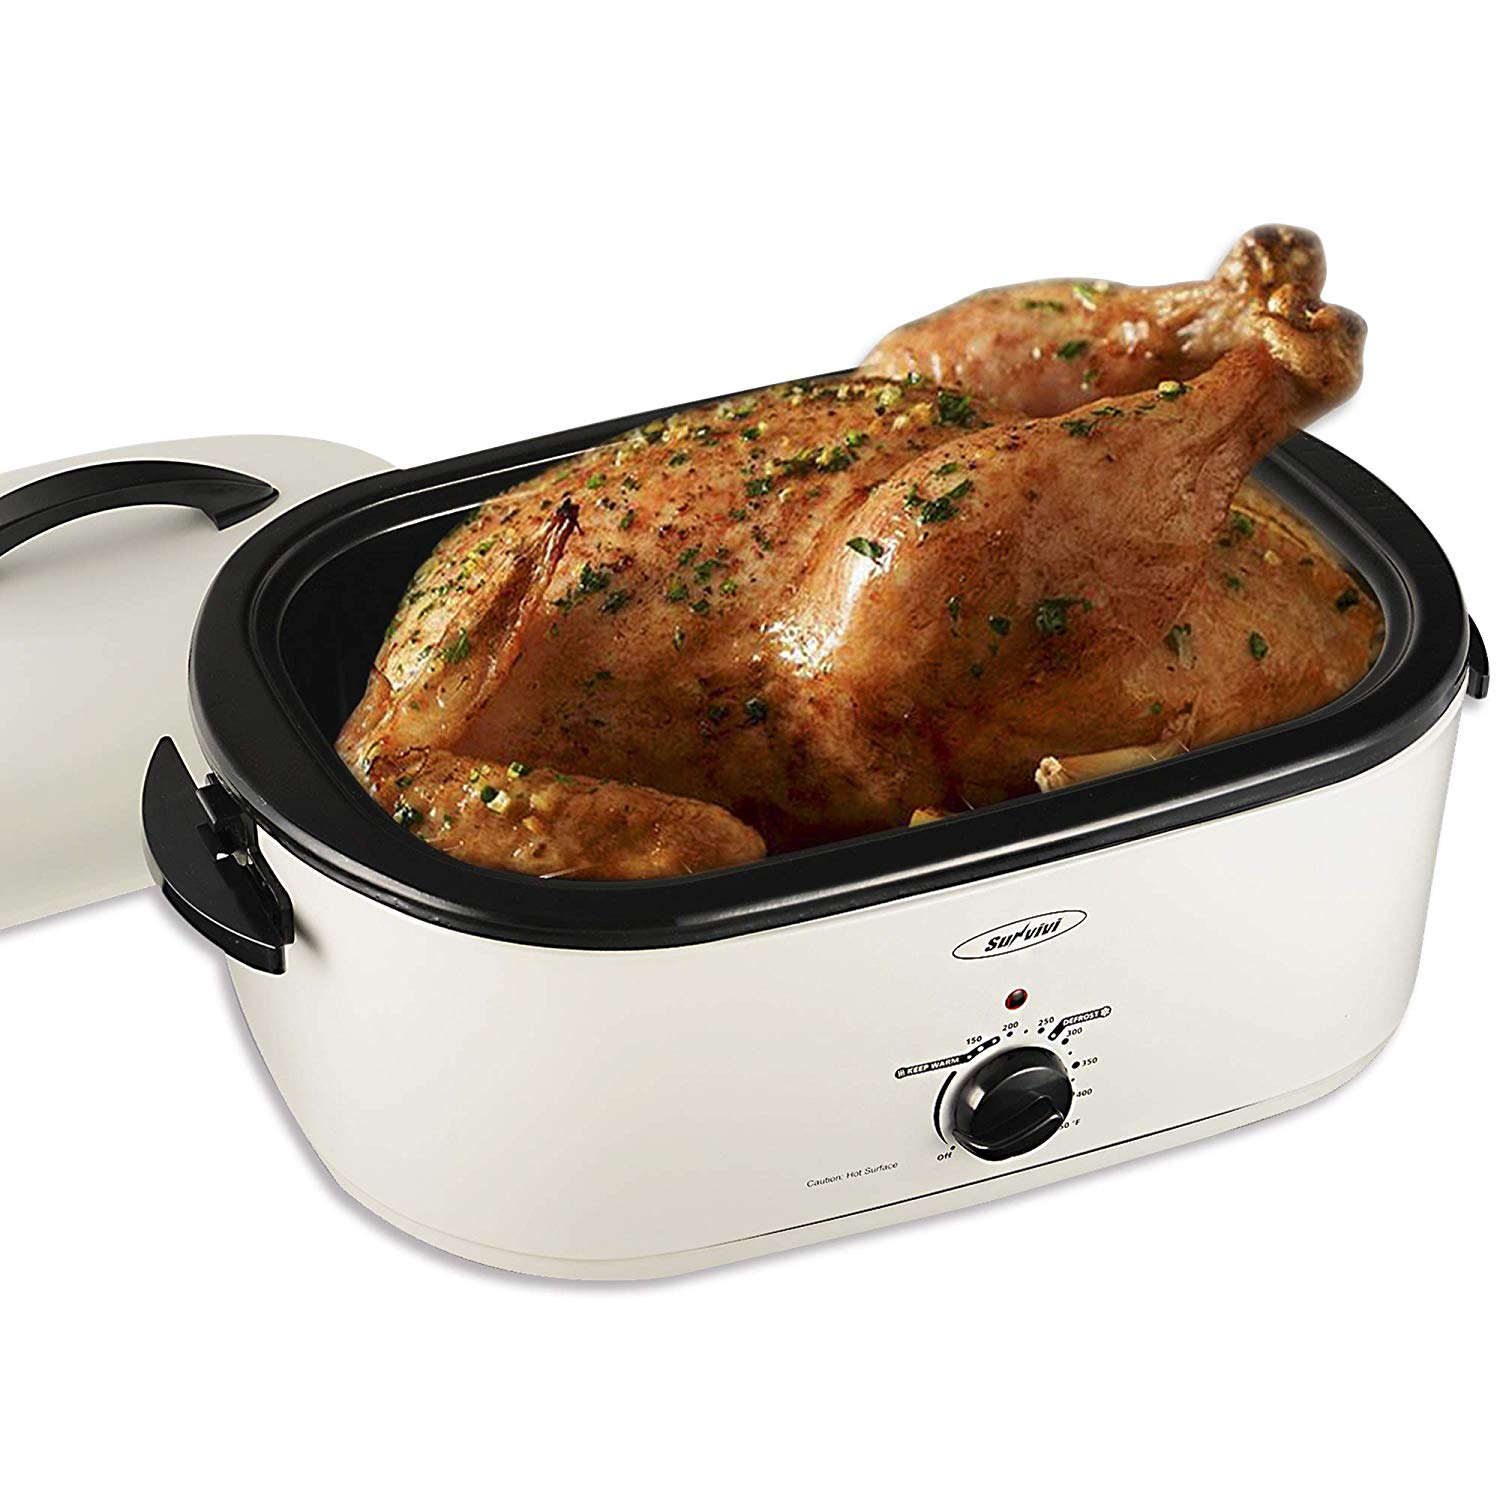 Sunvivi Electric Roaster Oven with Self-Basting Lid